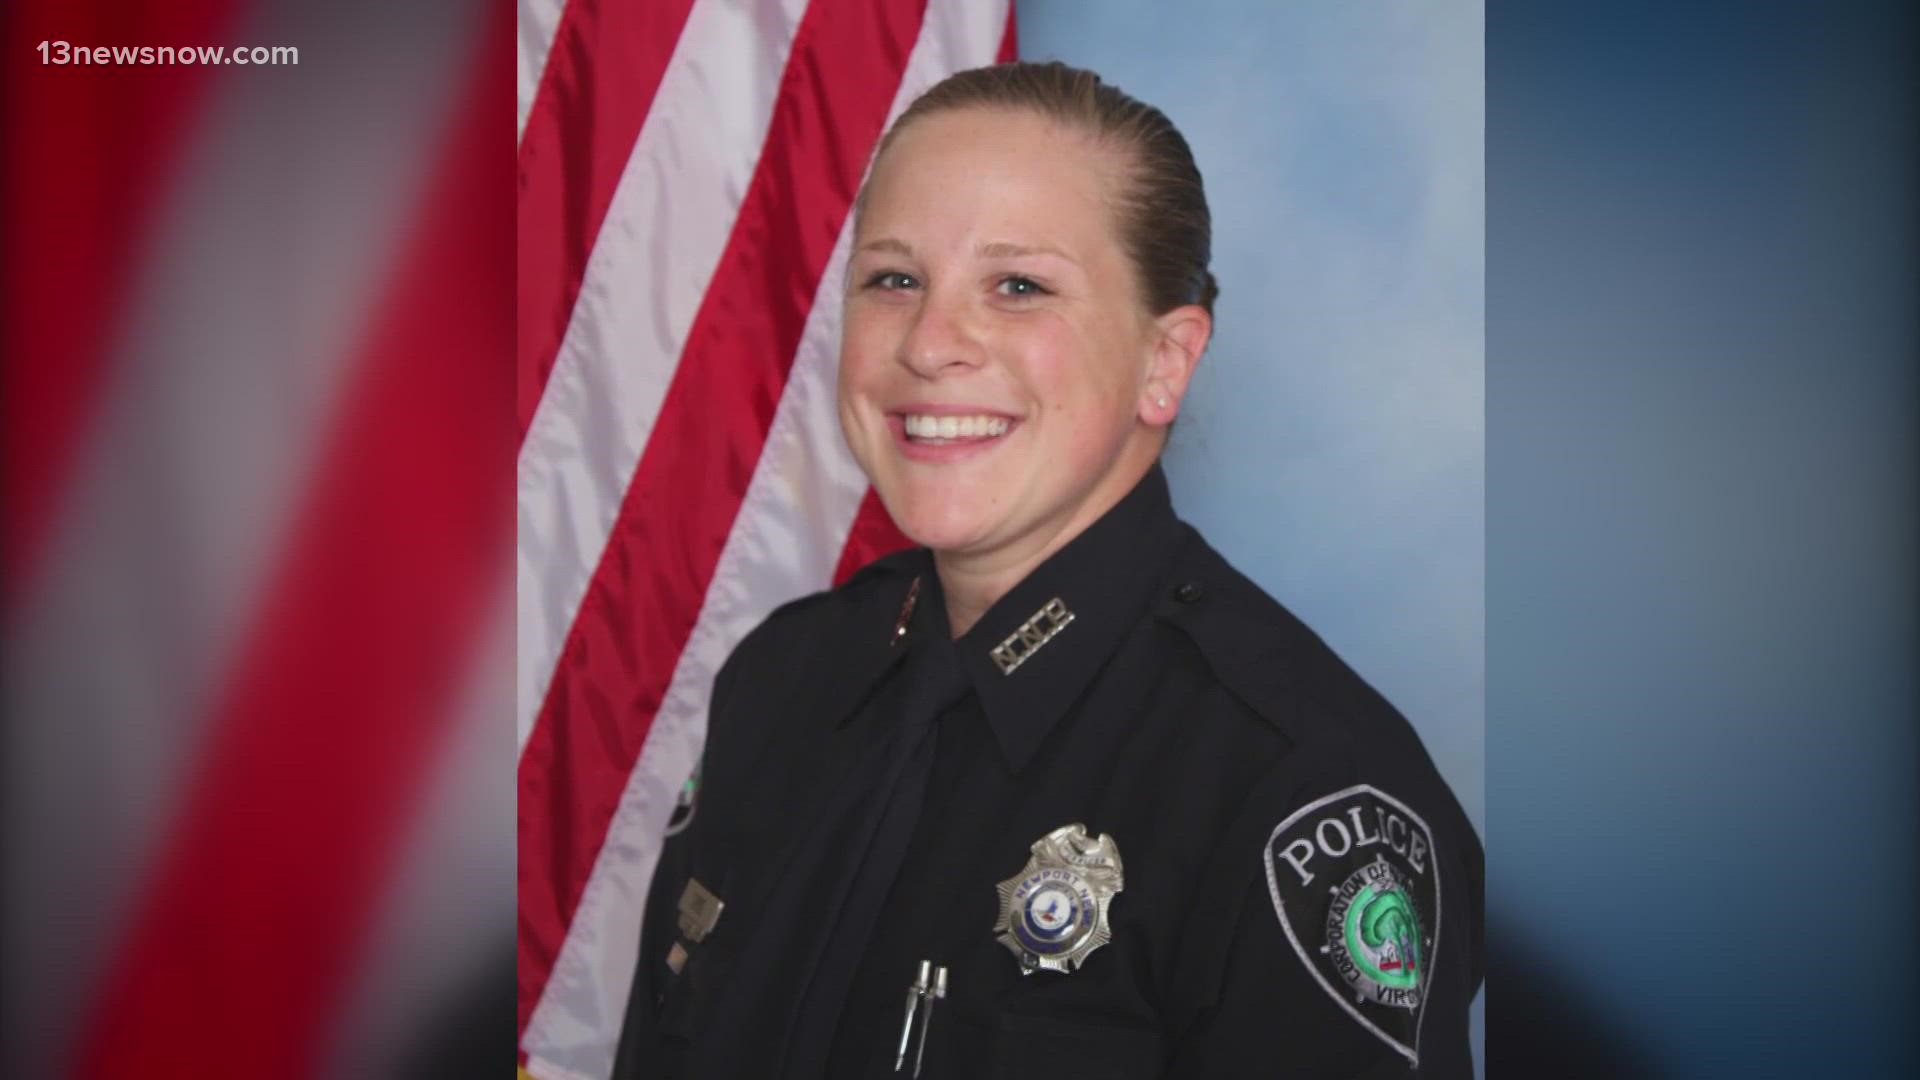 The vehicle dragged Officer Thyne along with it, and she died after the car crashed into a tree. At times, tears could be heard and seen in the courtroom.